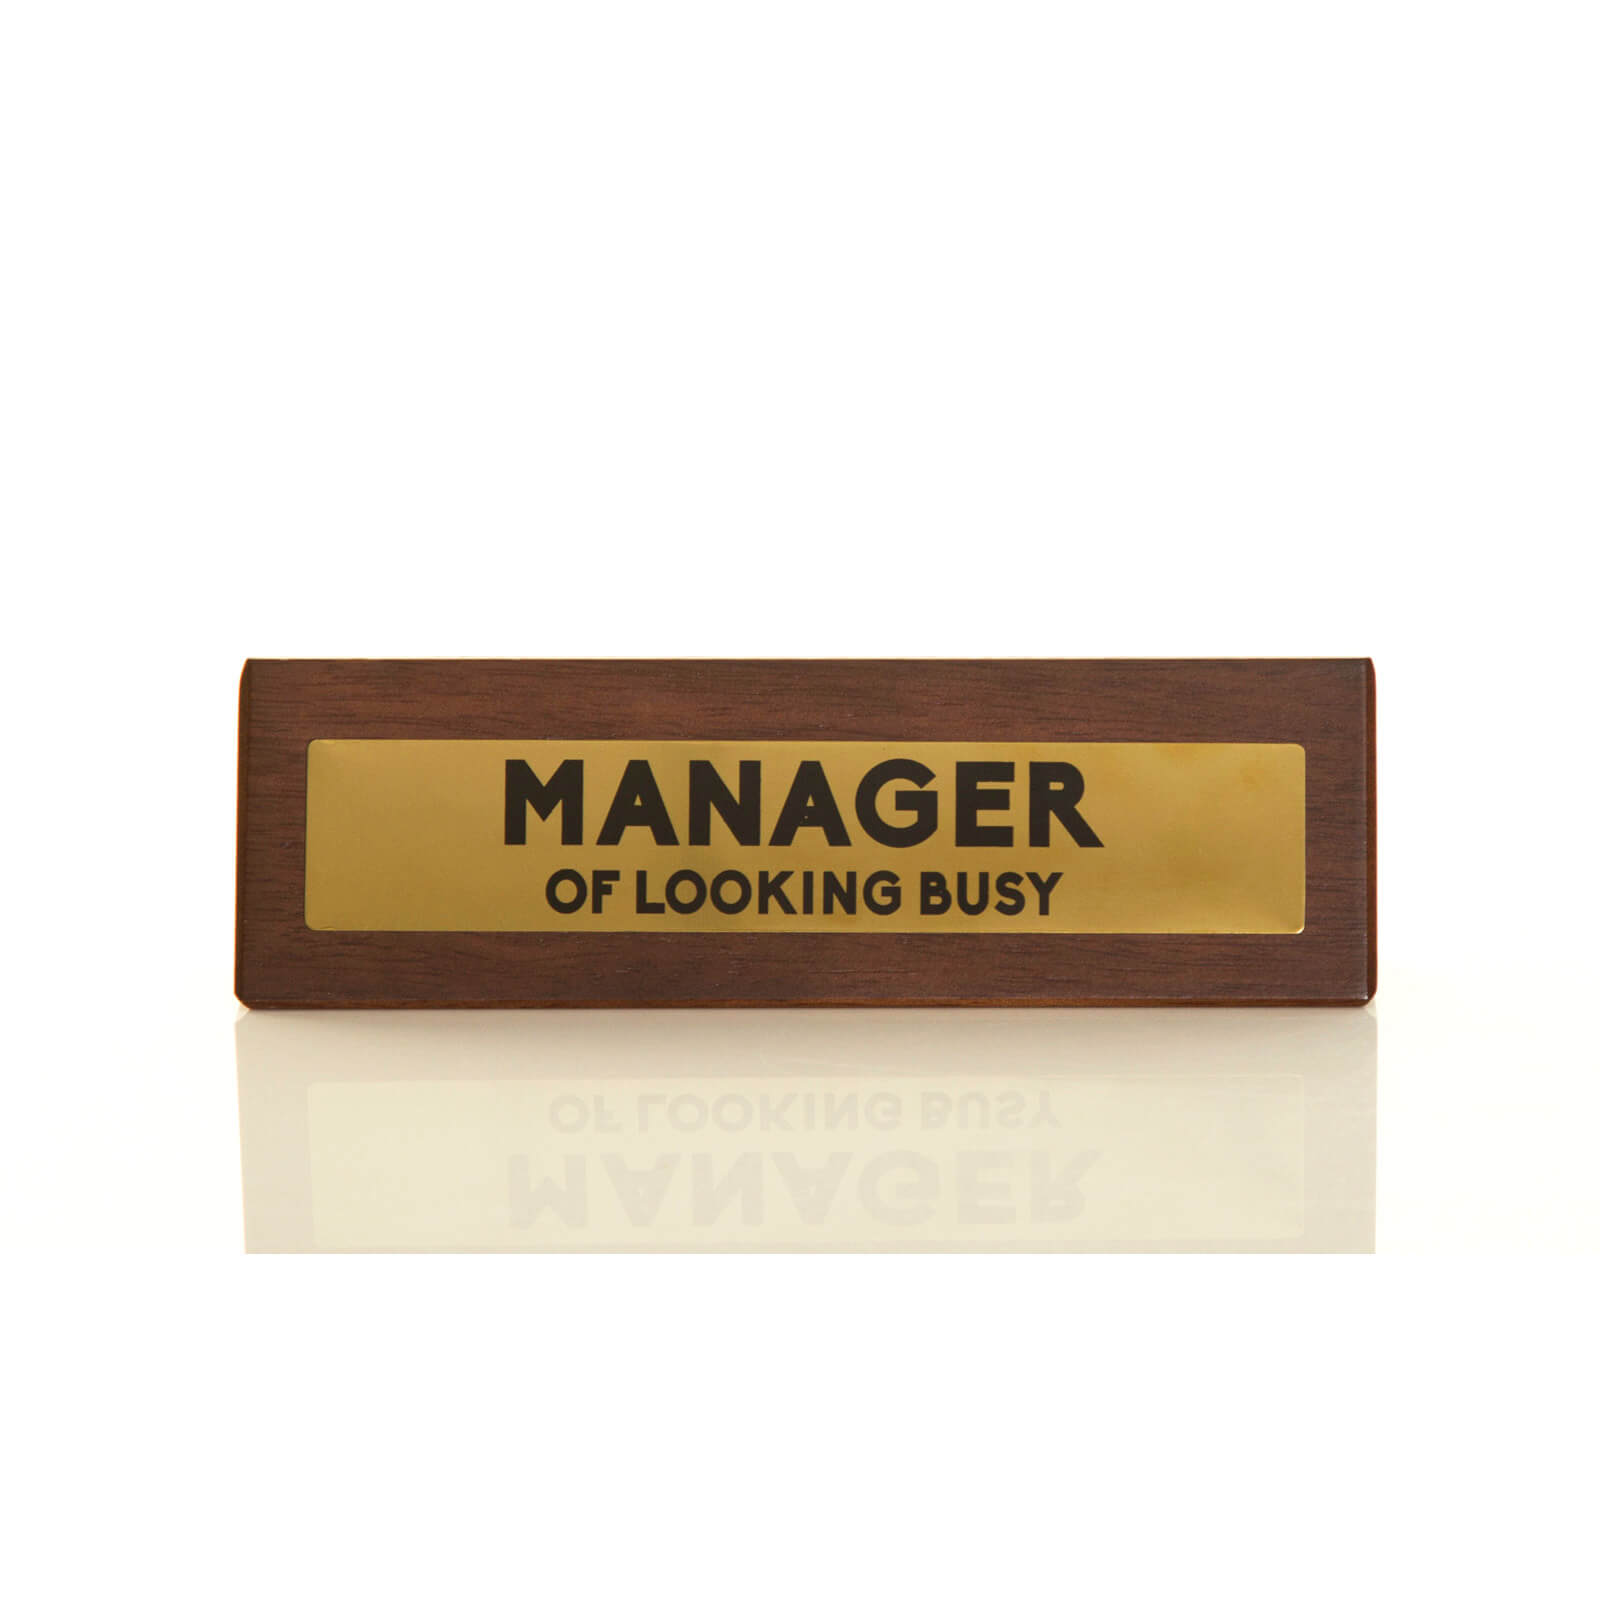 Manager Of Looking Busy Wooden Desk Sign Dark Oak Gold